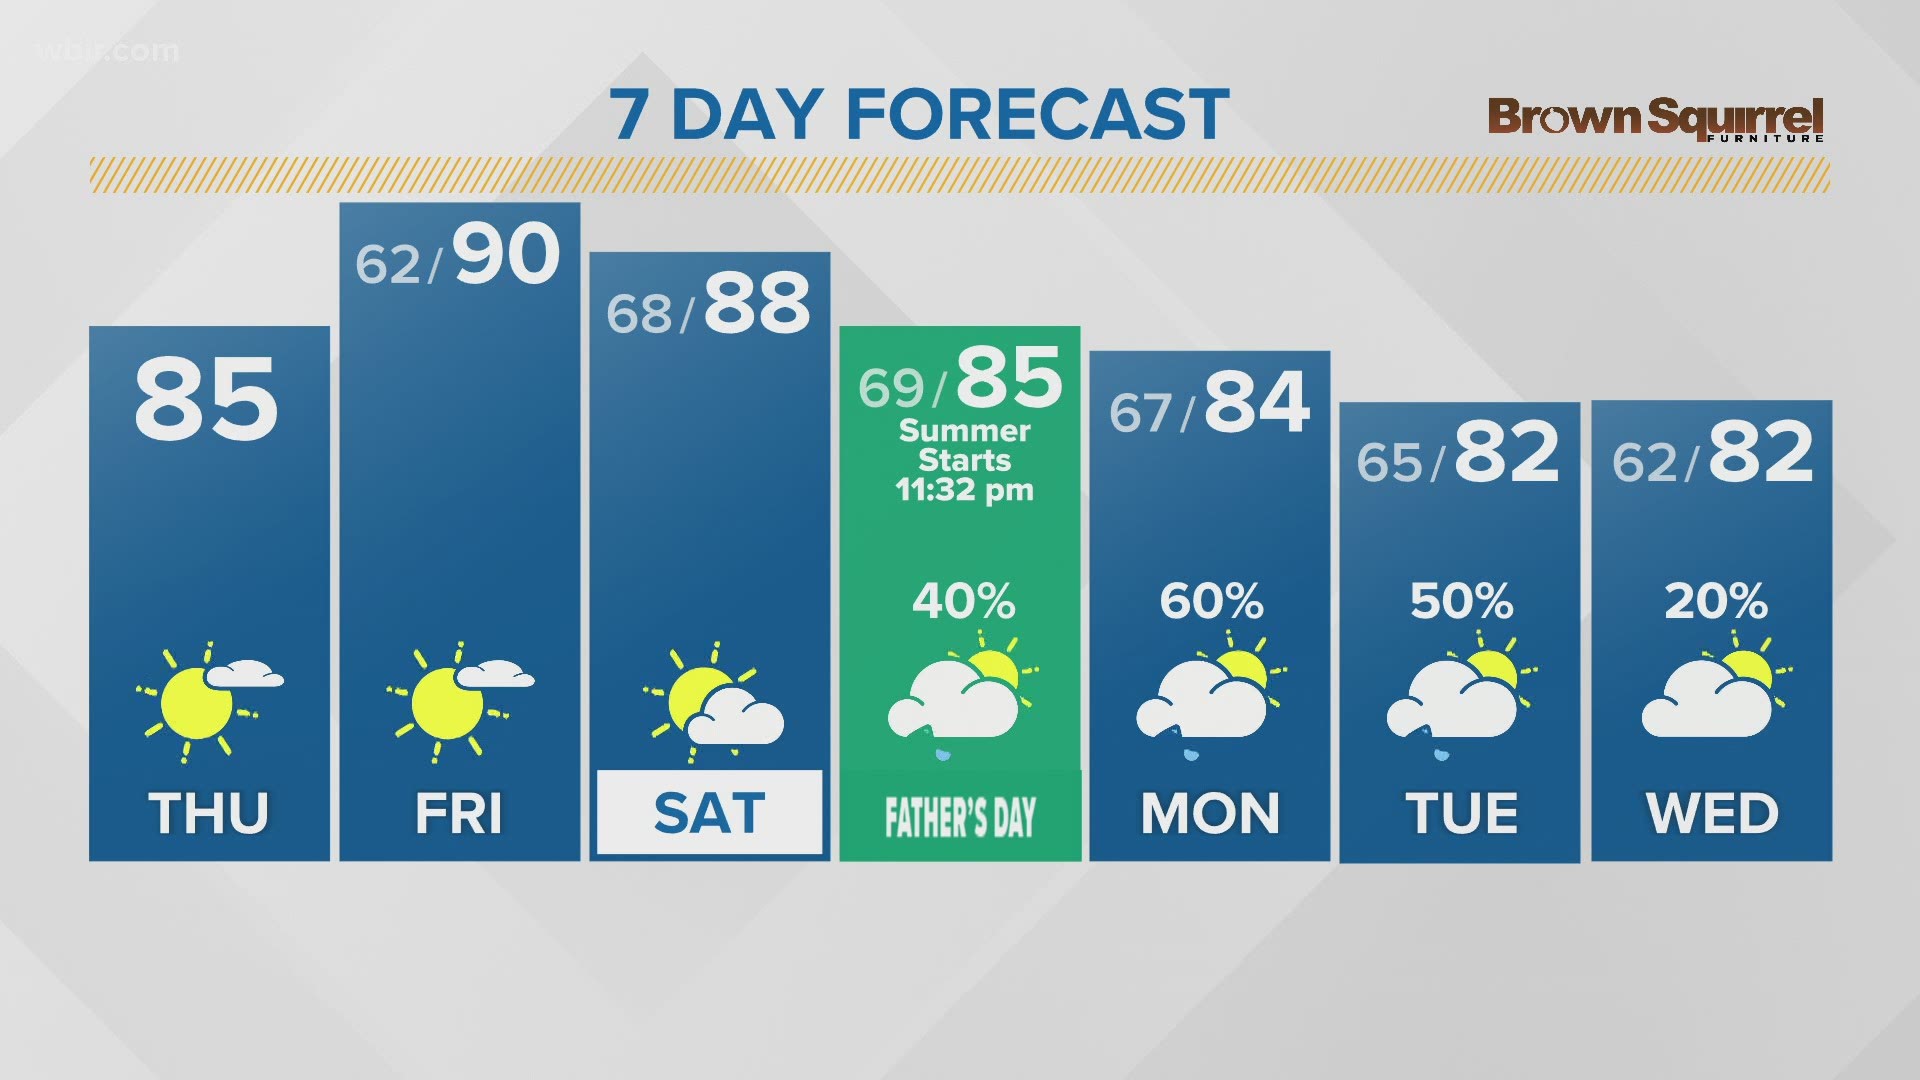 Humidity ahead of a potential tropical system will increase into the weekend along with a chance for showers returning.